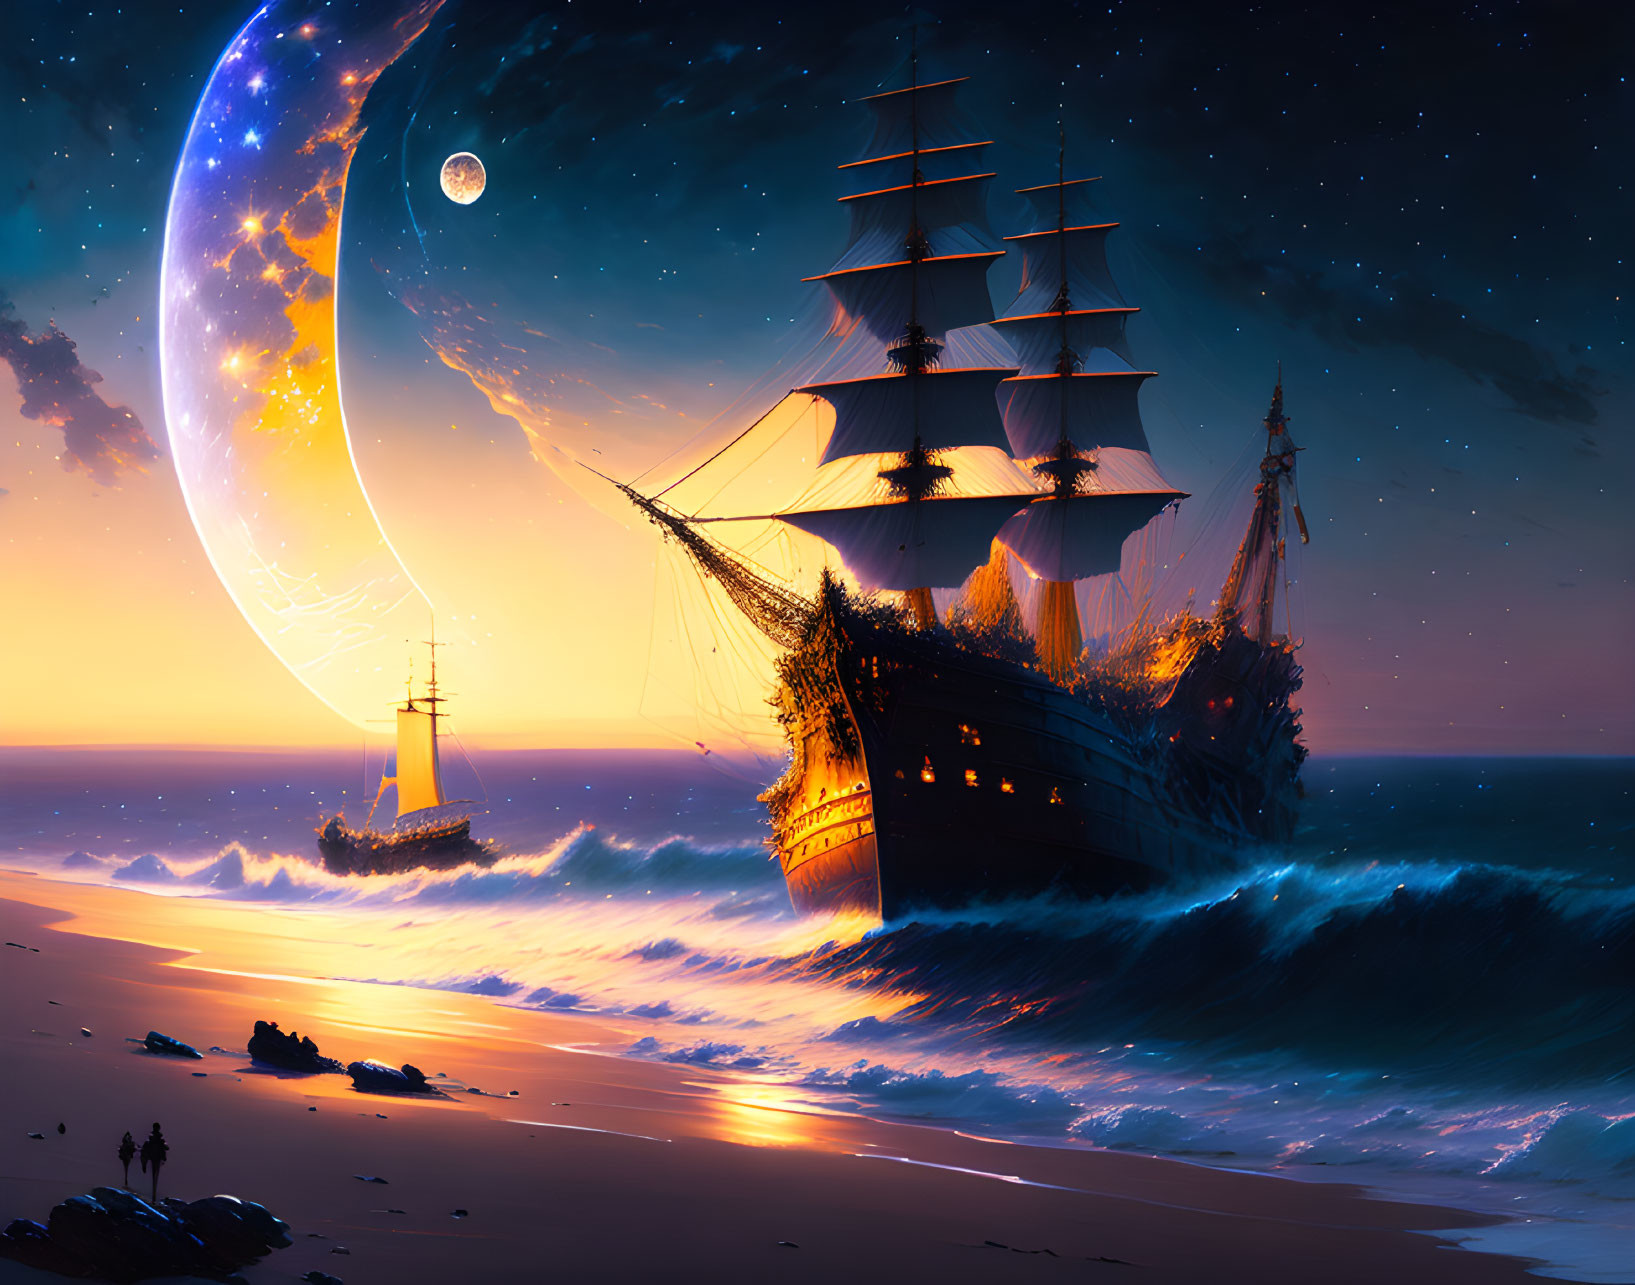 Sailing ship on moonlit ocean near beach with crescent moon and stars